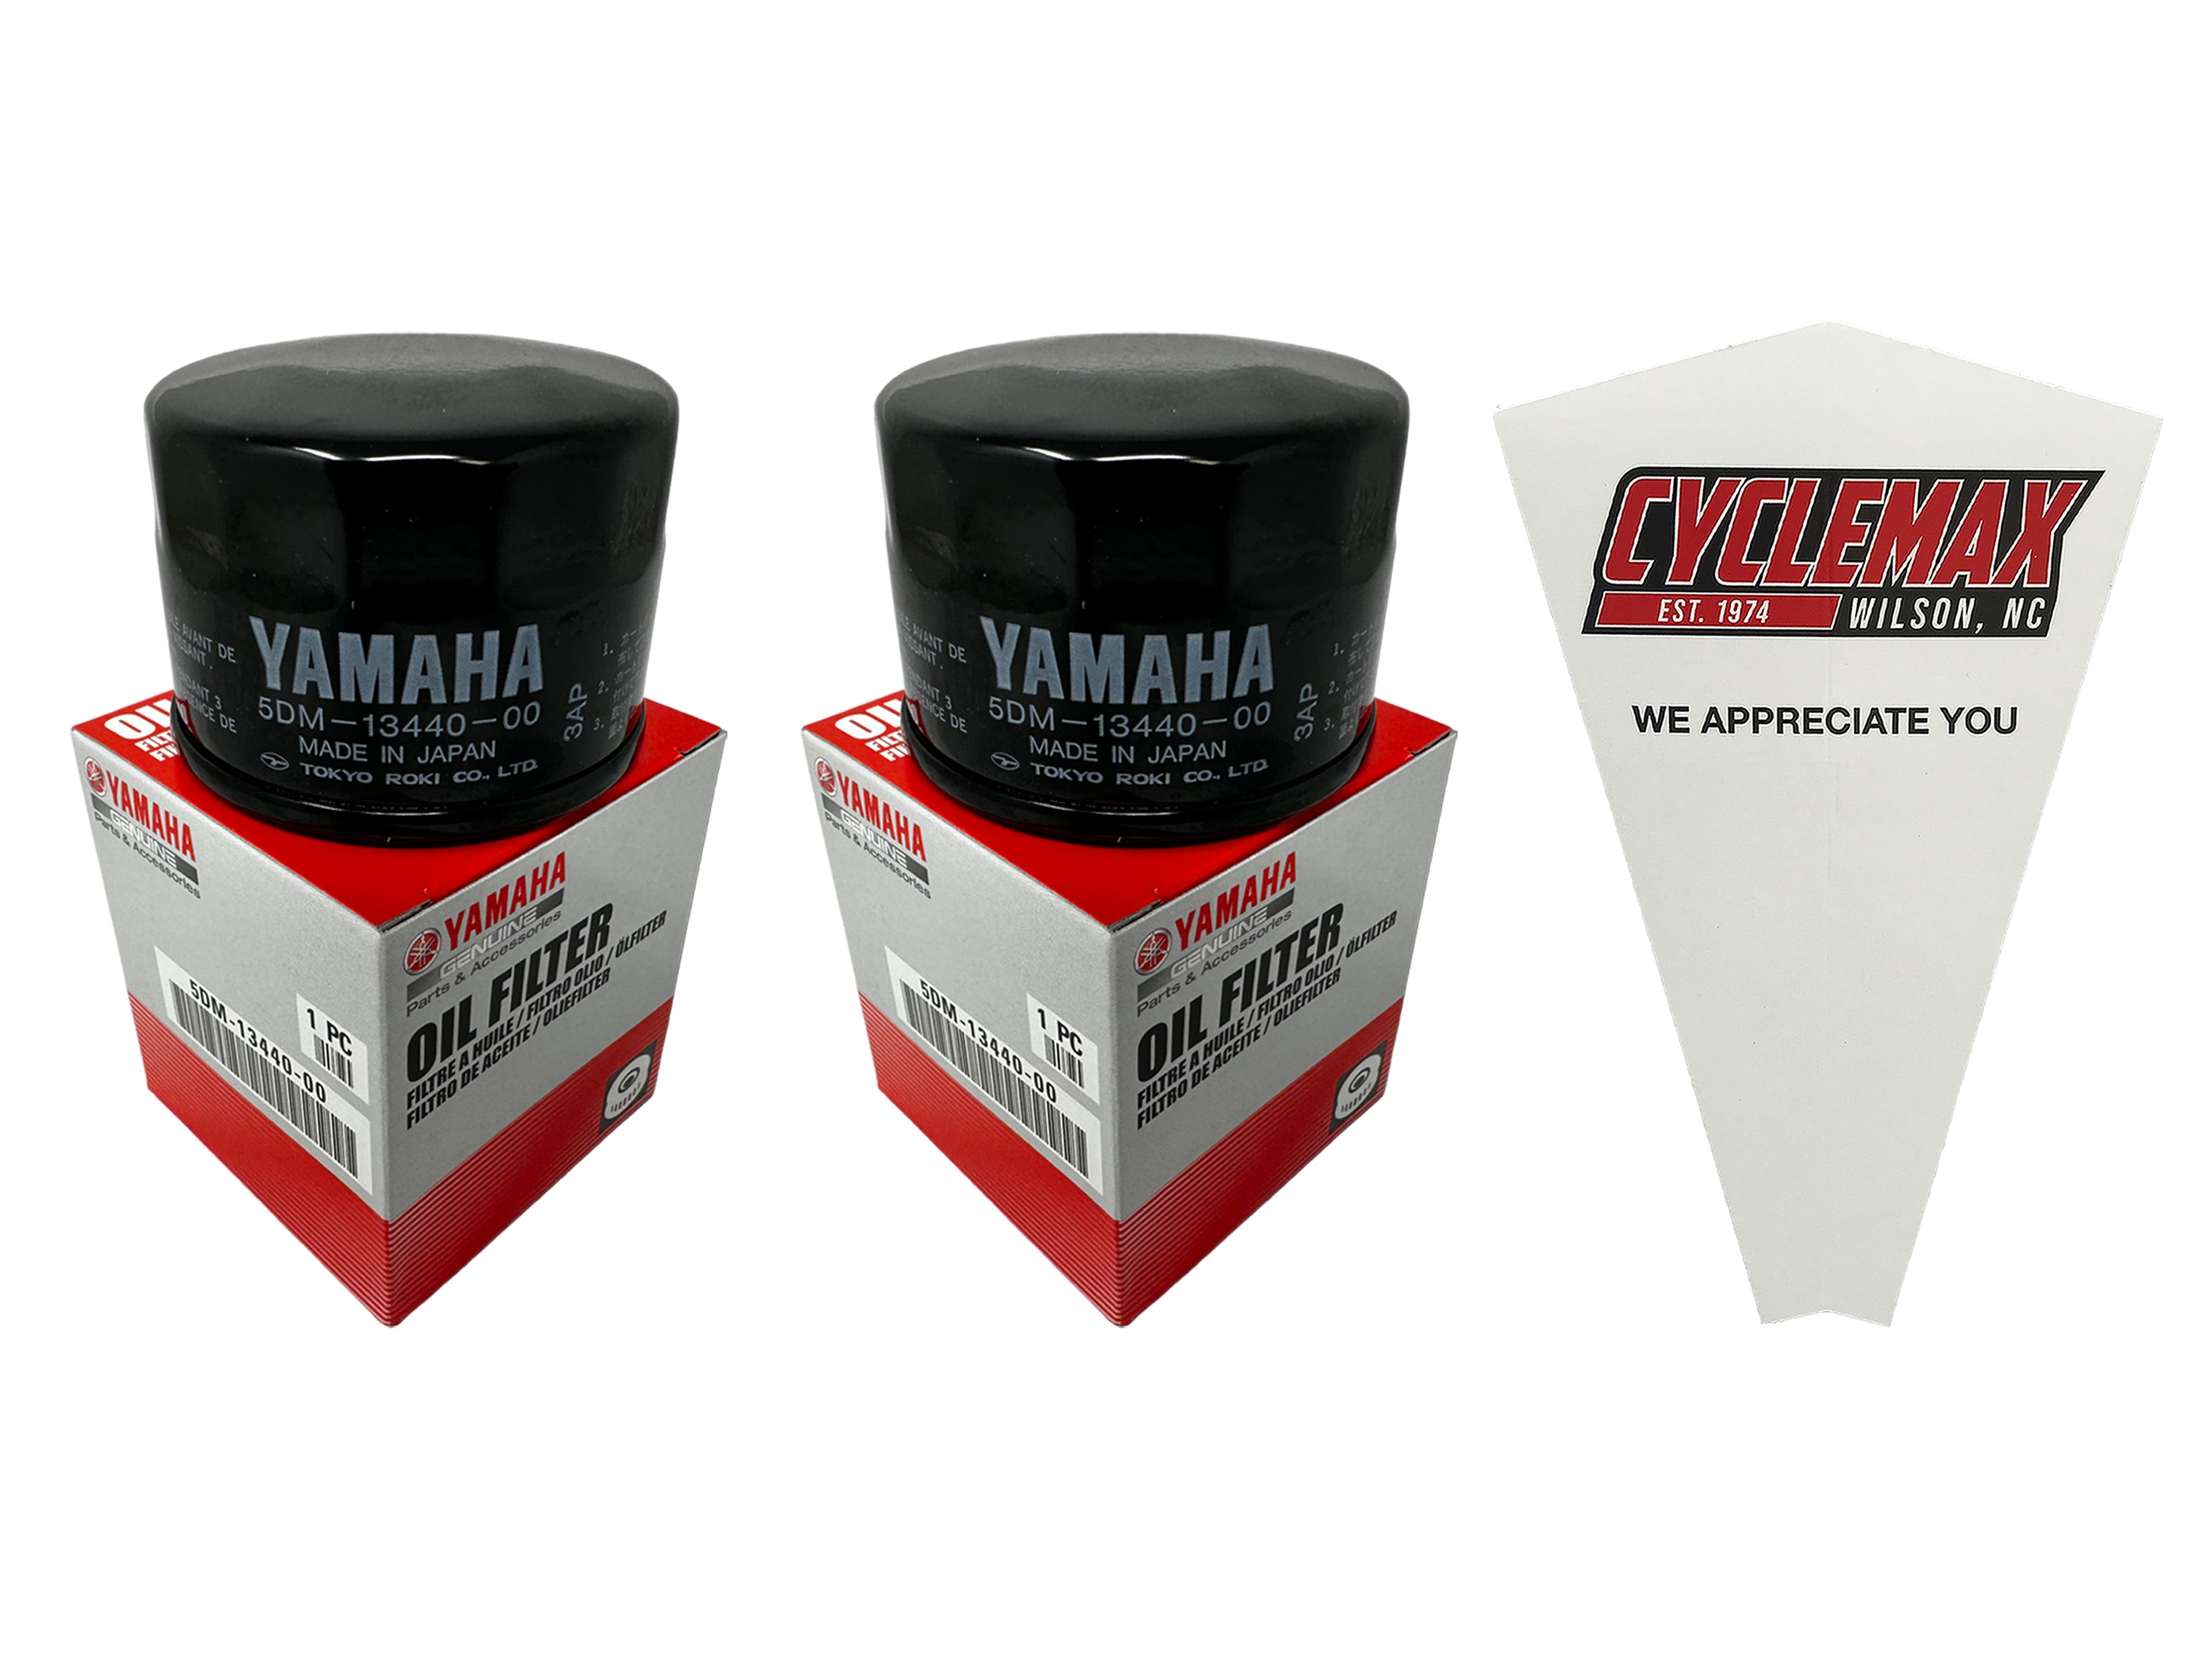 Cyclemax Two Pack for Yamaha Oil Filter Cleaner Element Assembly 5DM-13440-00-00 Contains Two Filters and a Funnel